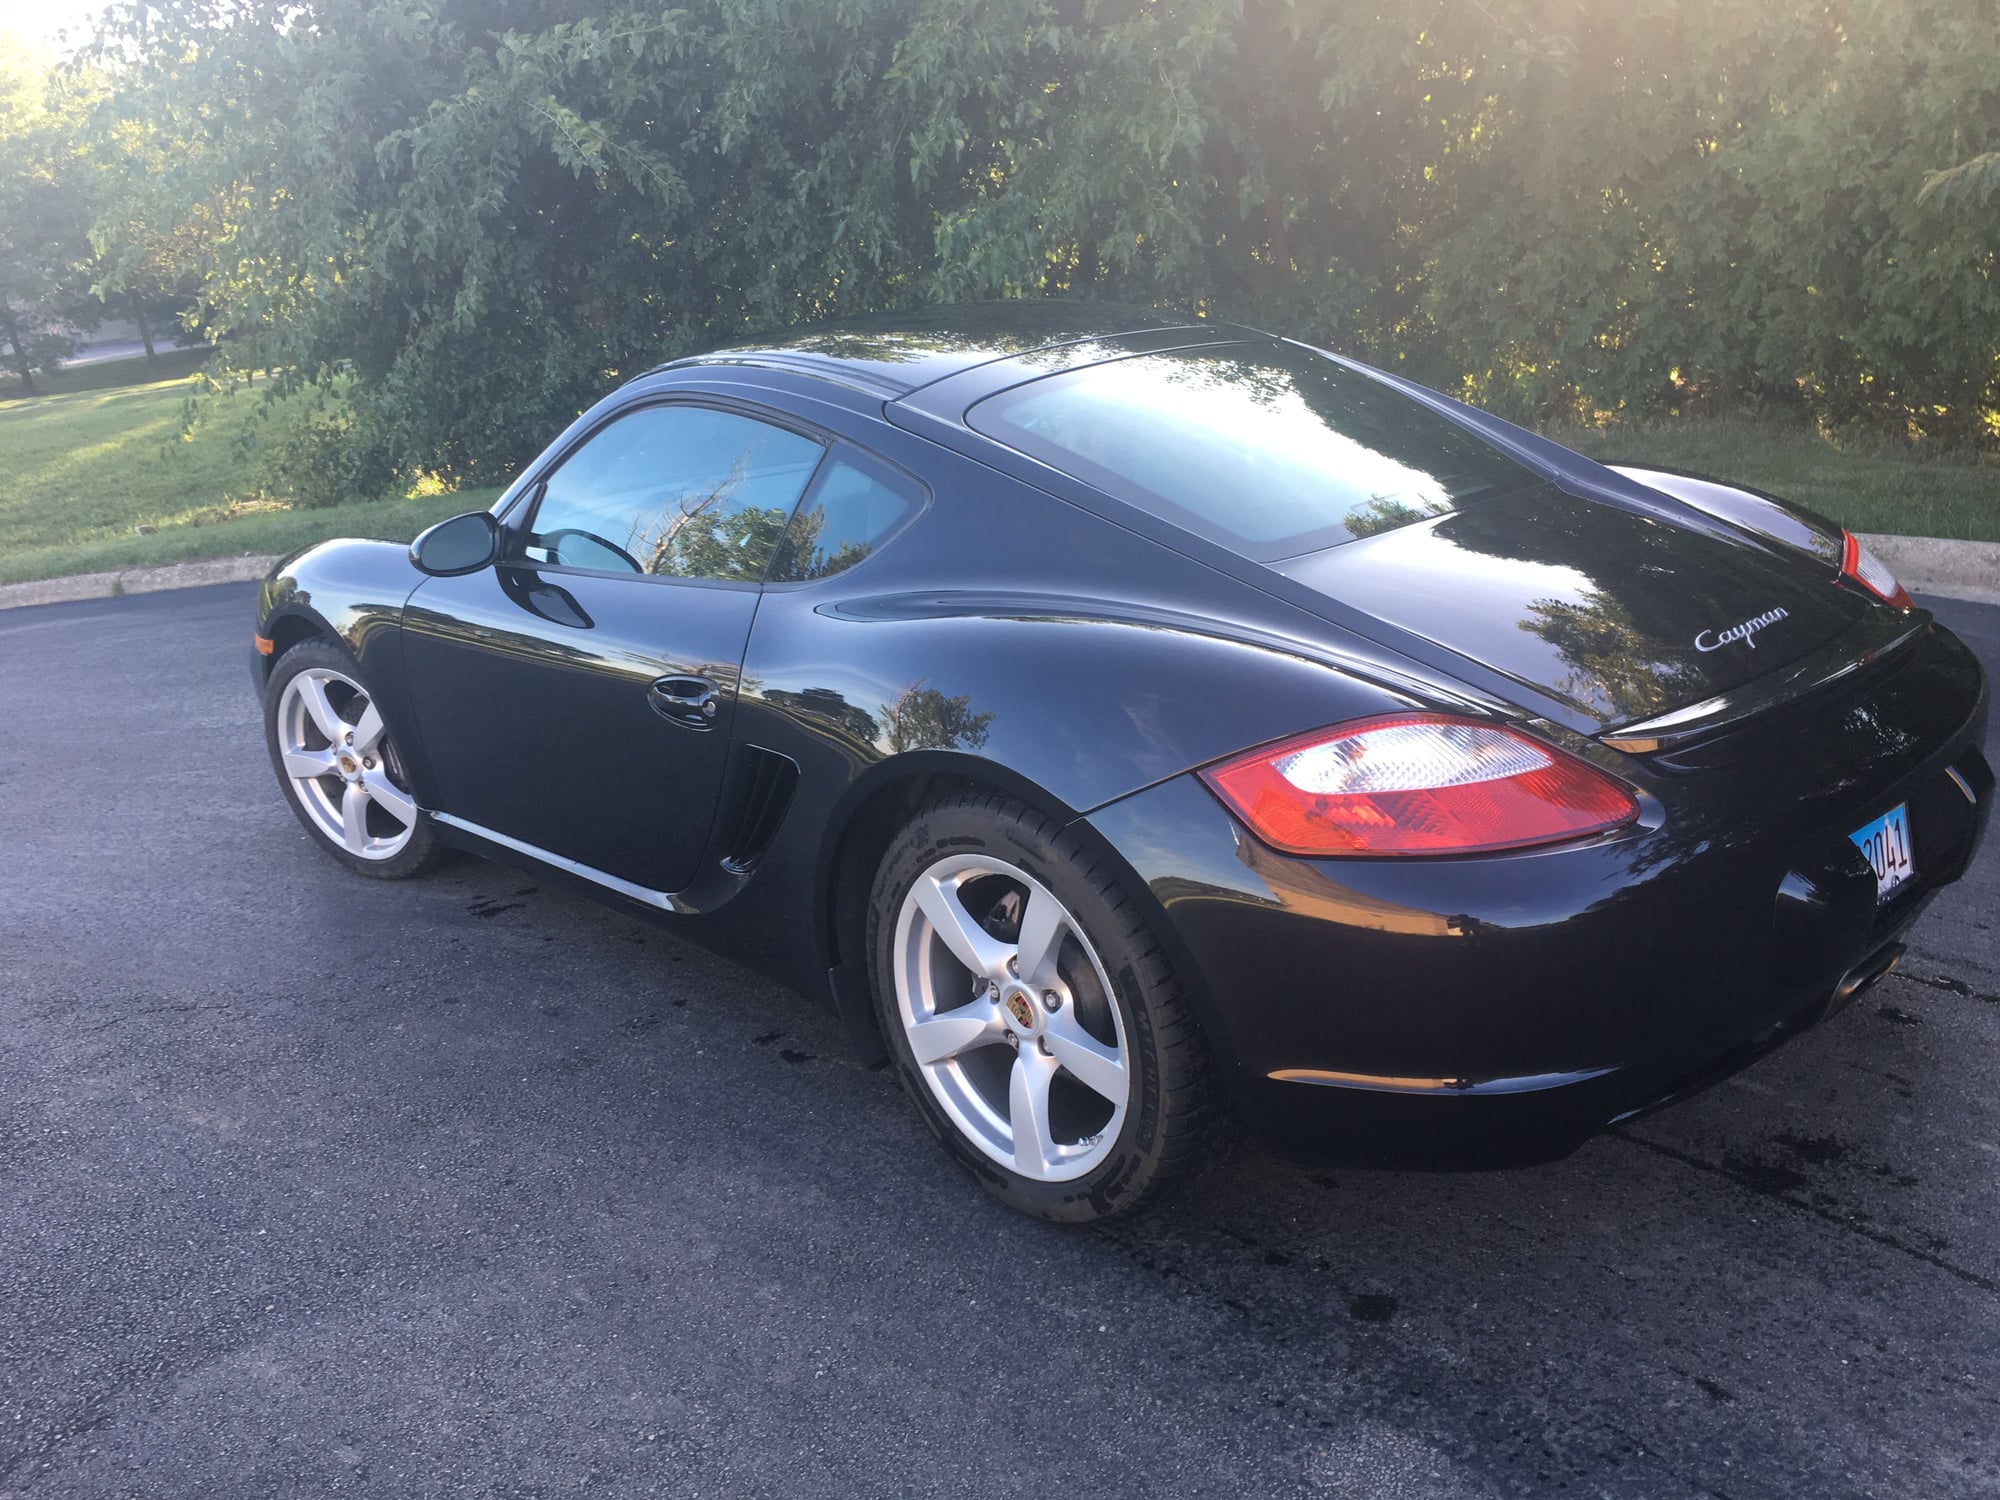 2007 Porsche Cayman - 2007 Cayman 31k miles, tiptronic, major maintenance done - Used - VIN WPOAA29827U762917 - 31,000 Miles - 6 cyl - 2WD - Automatic - Coupe - Black - Chiacago, IL 60654, United States